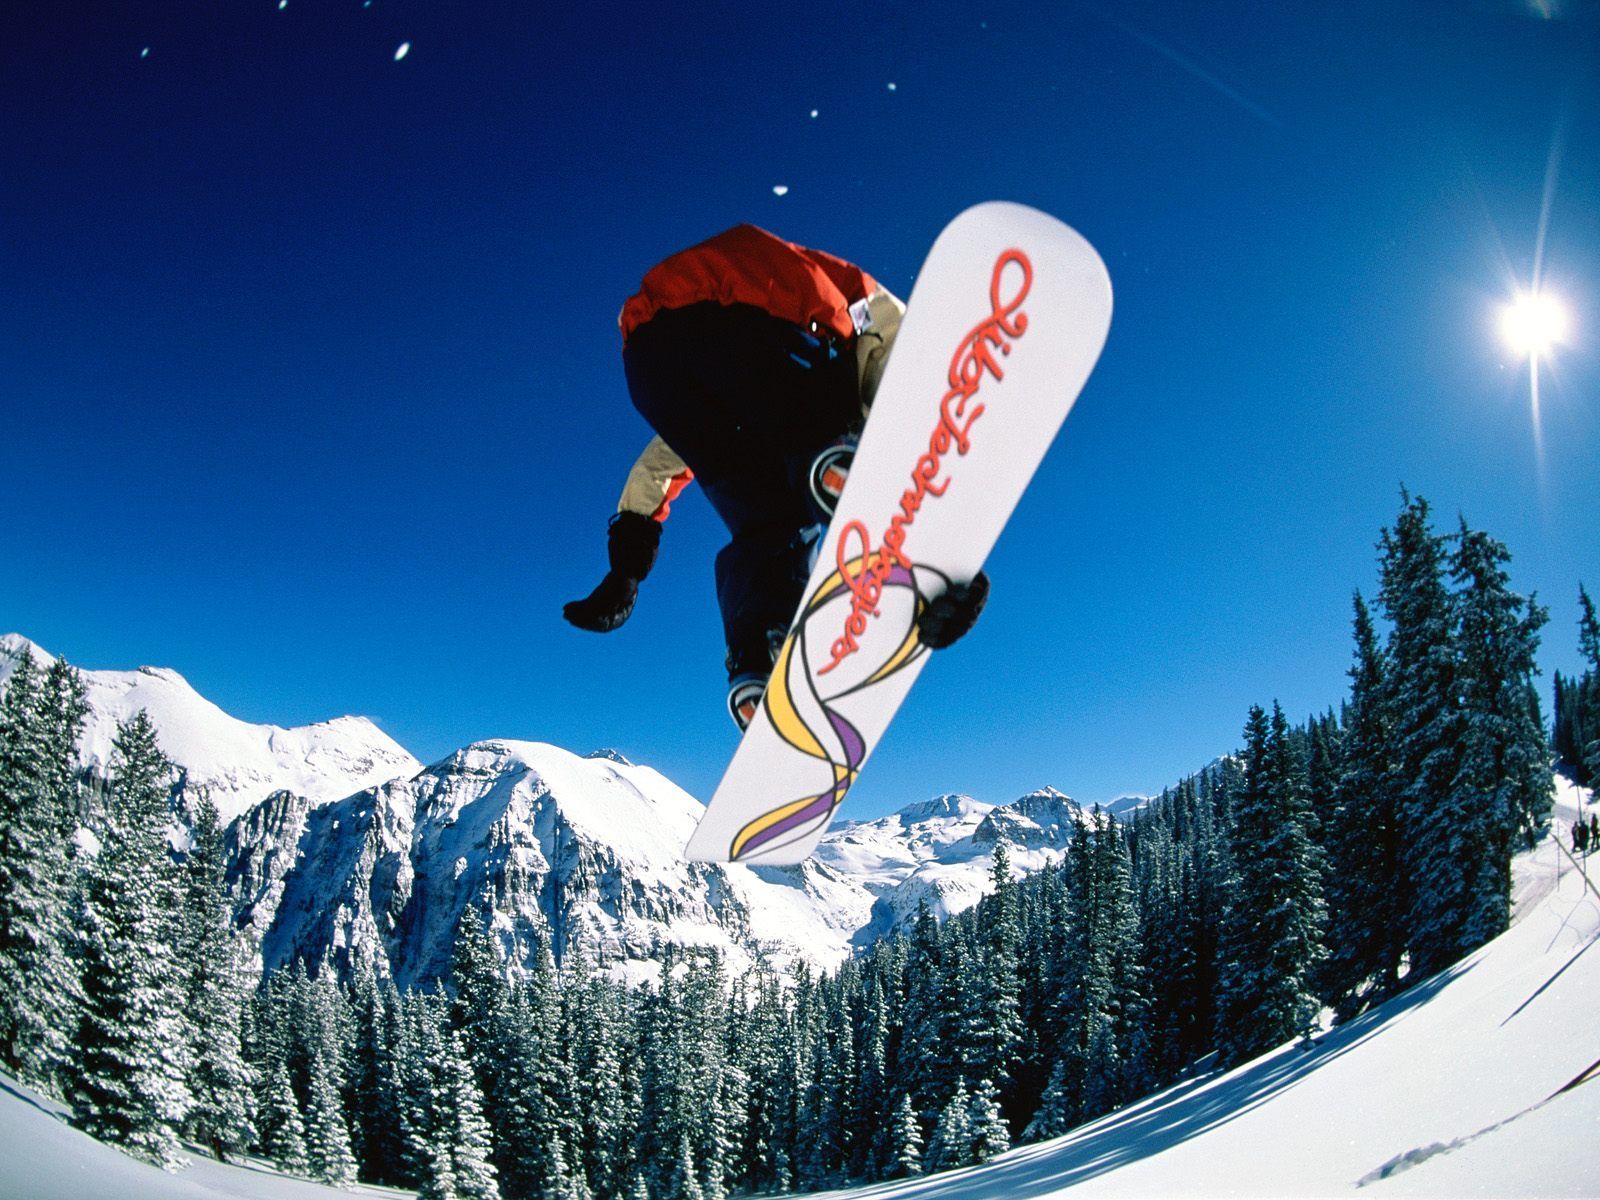 Snowboard Free Desktop Wallpapers for HD, Widescreen and Mobile